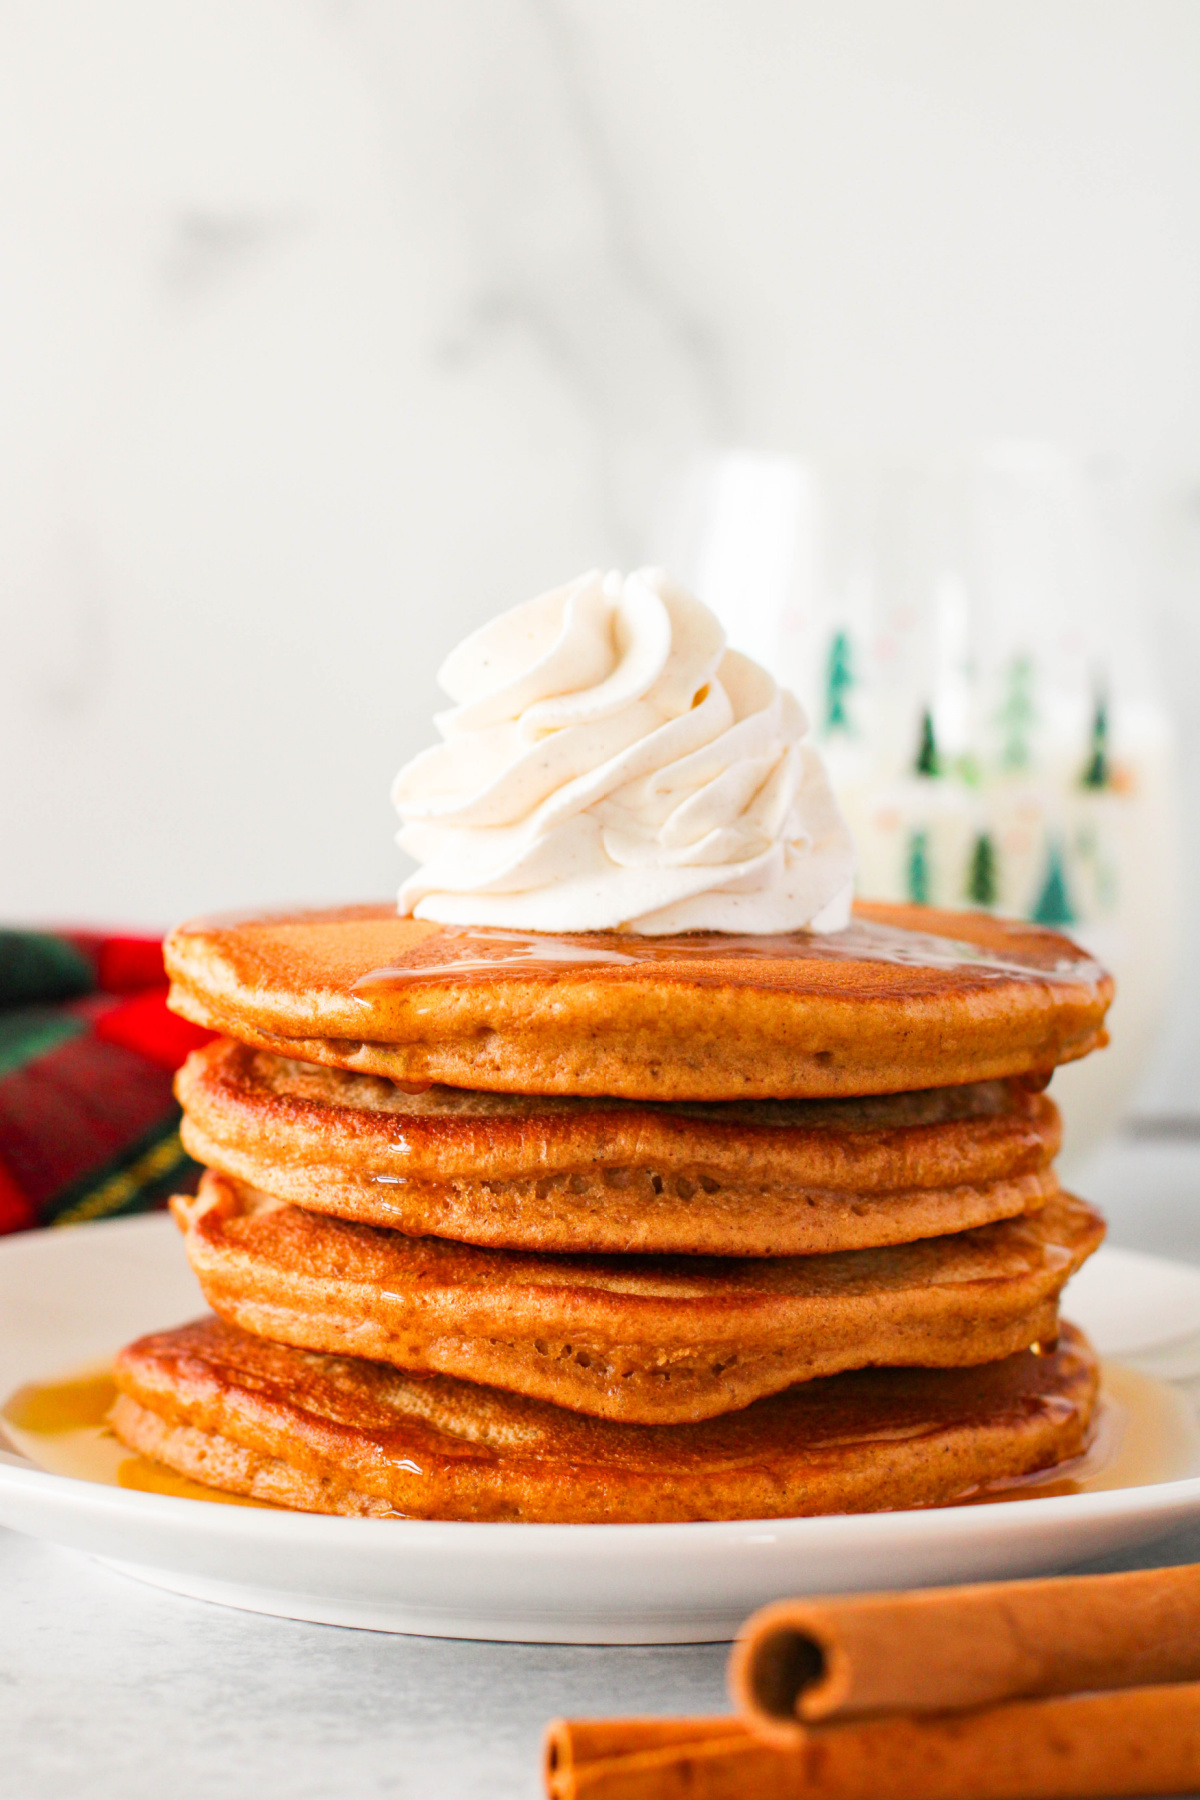 A stack of pancakes with whipped cream and cinnamon sticks.